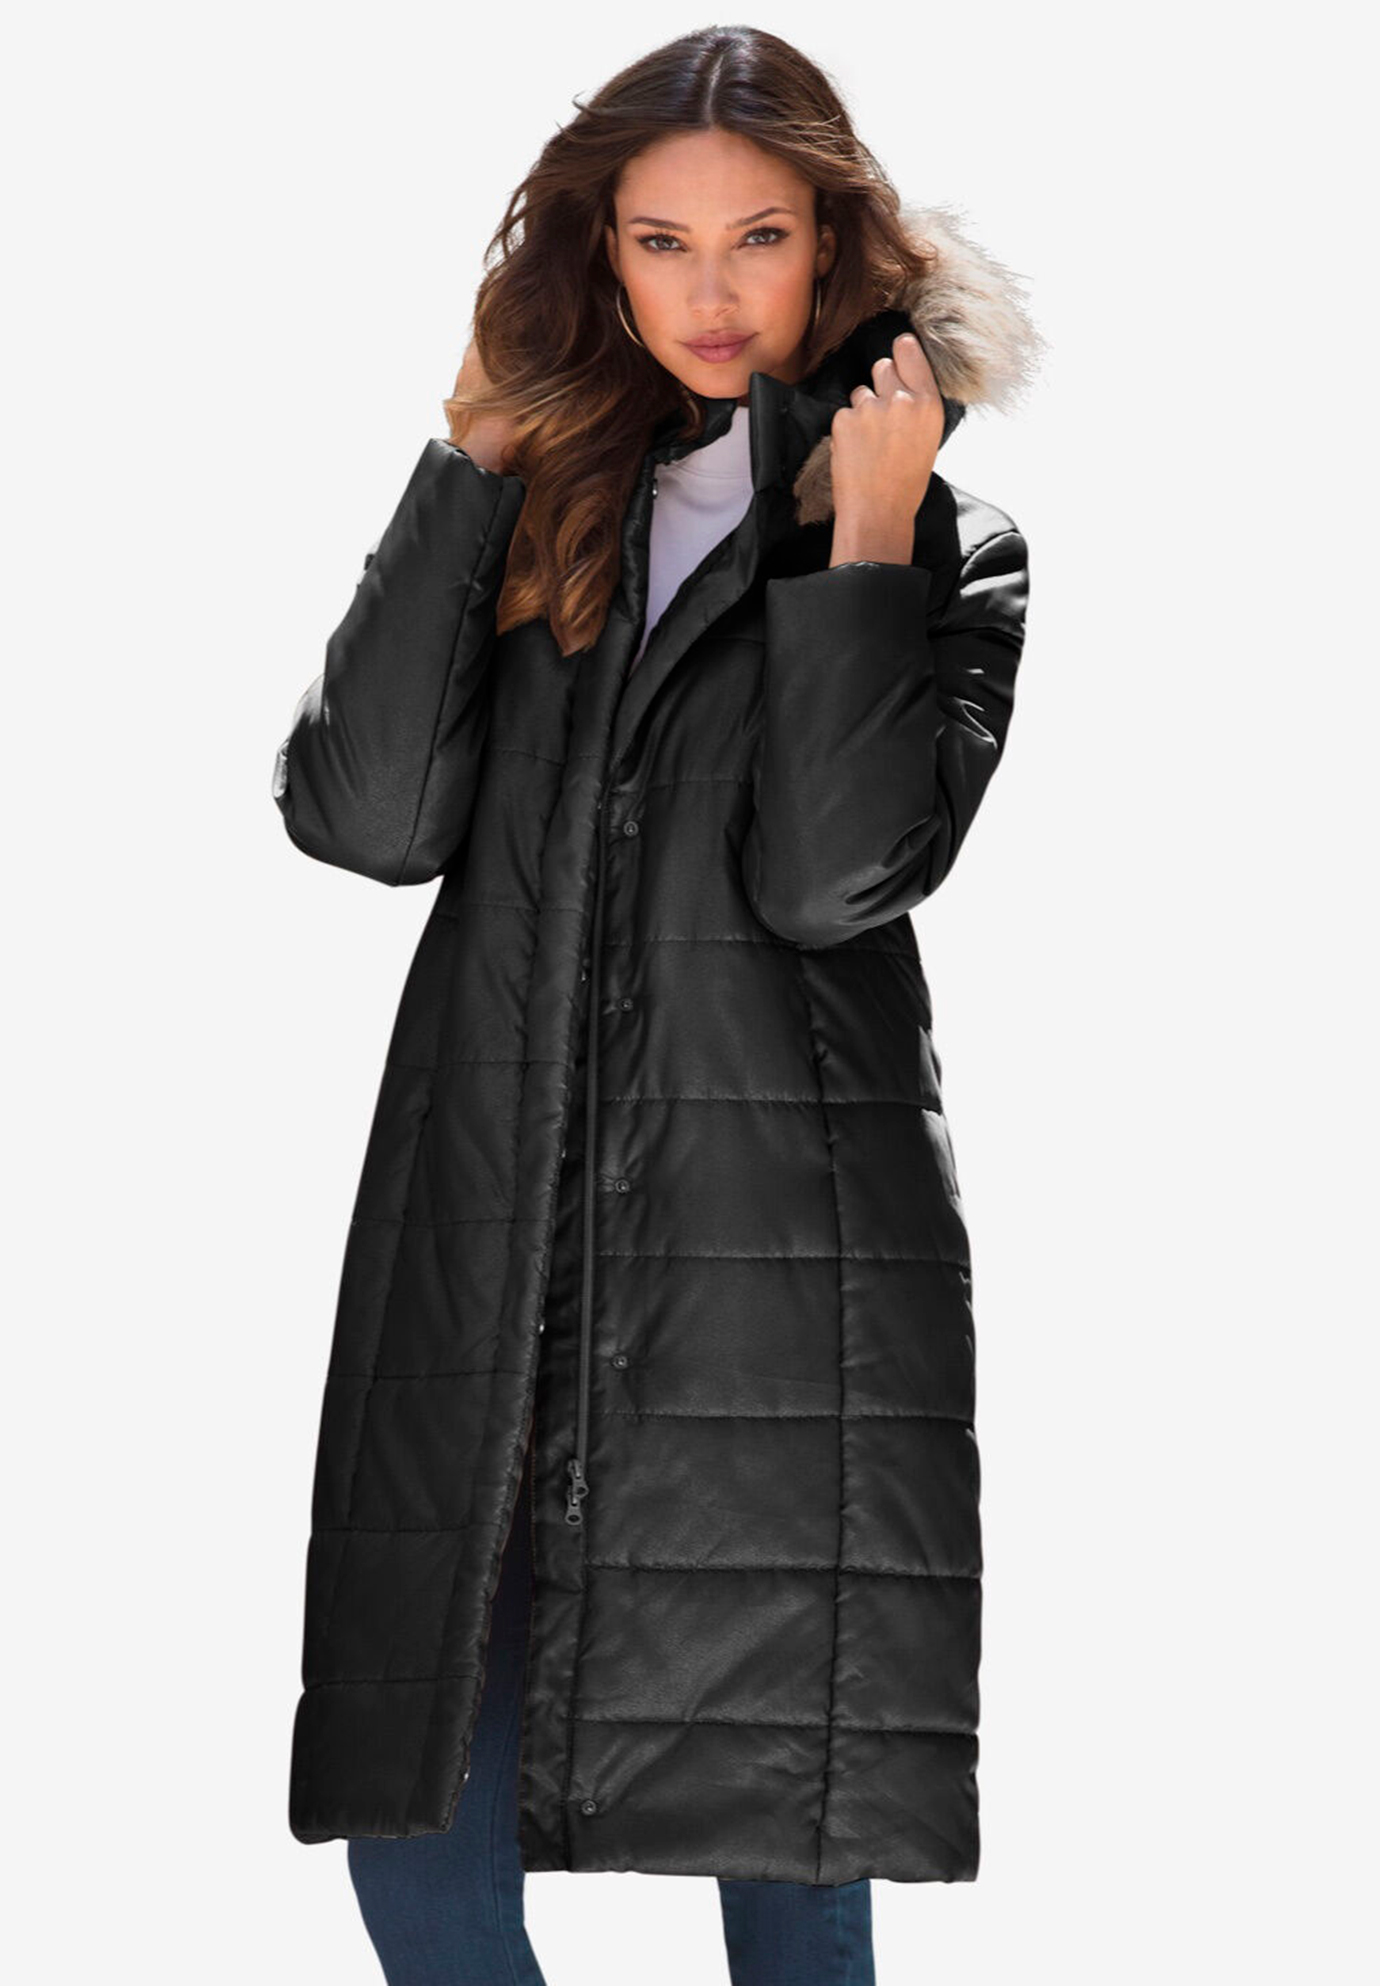 Cozy Up With These Coats and Layering Options from fullbeauty.com -  Sponsored